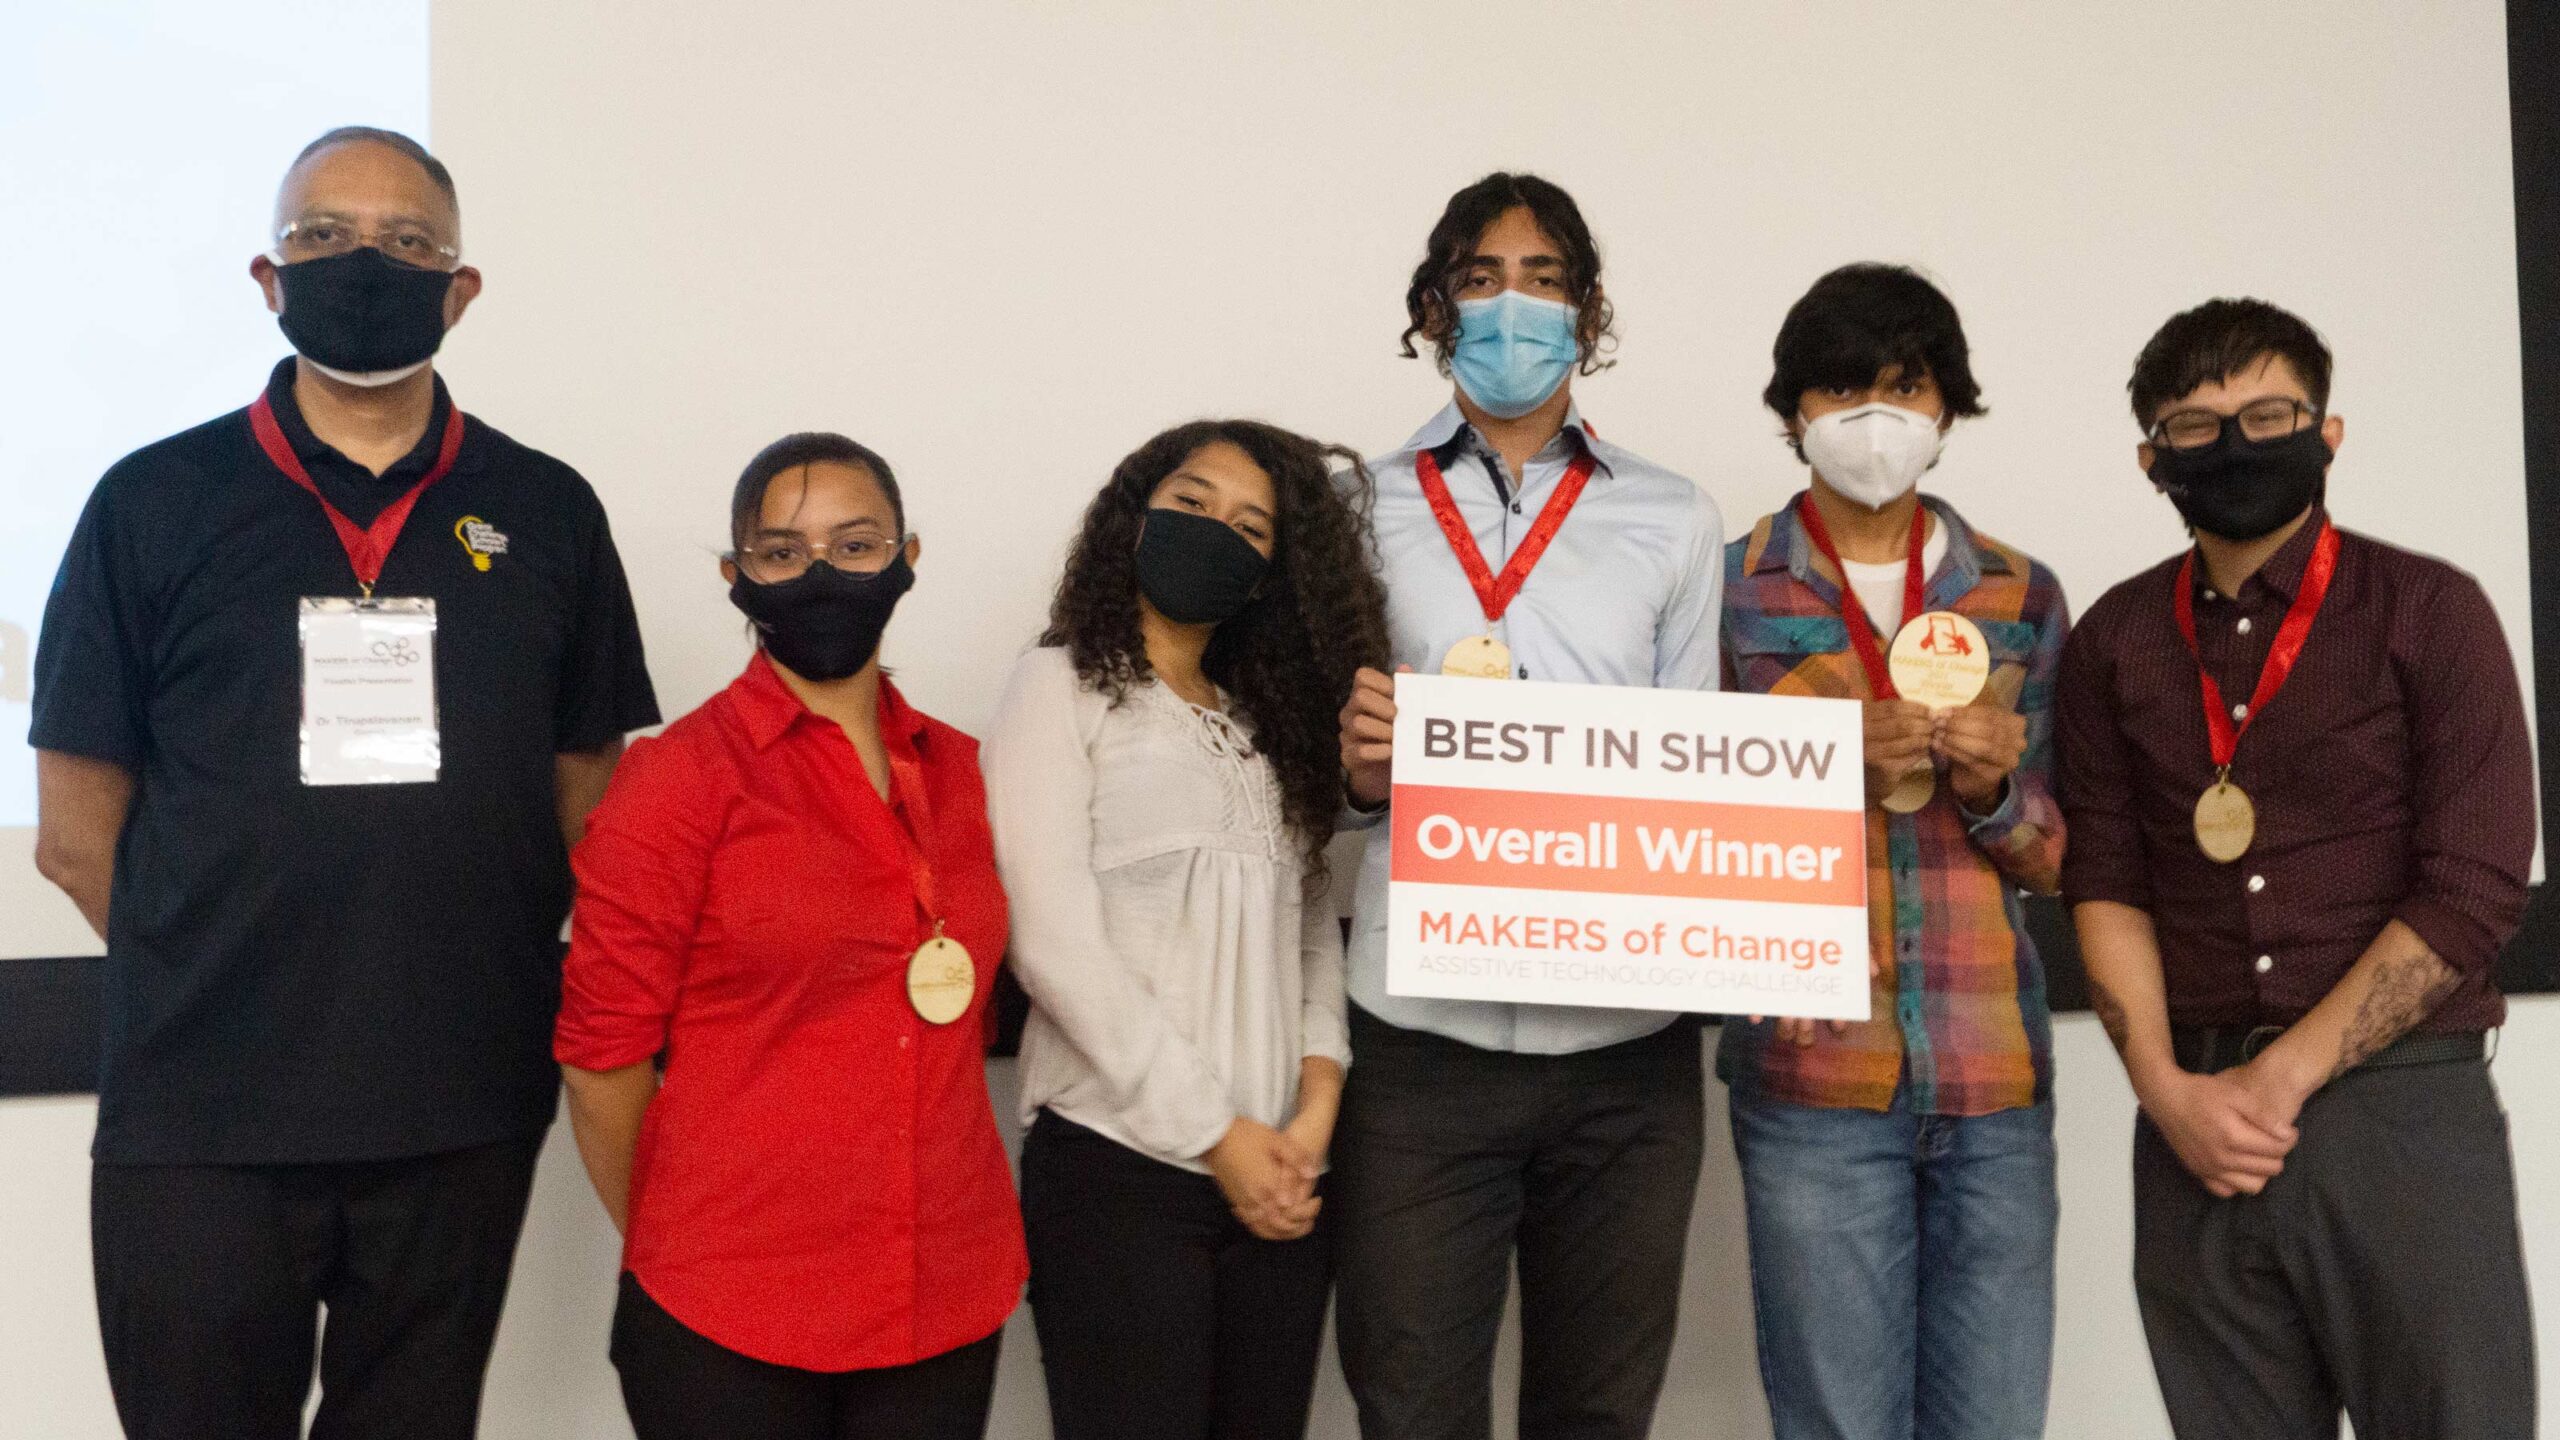 Five EPICS High students with a sign that says "Best in Show"